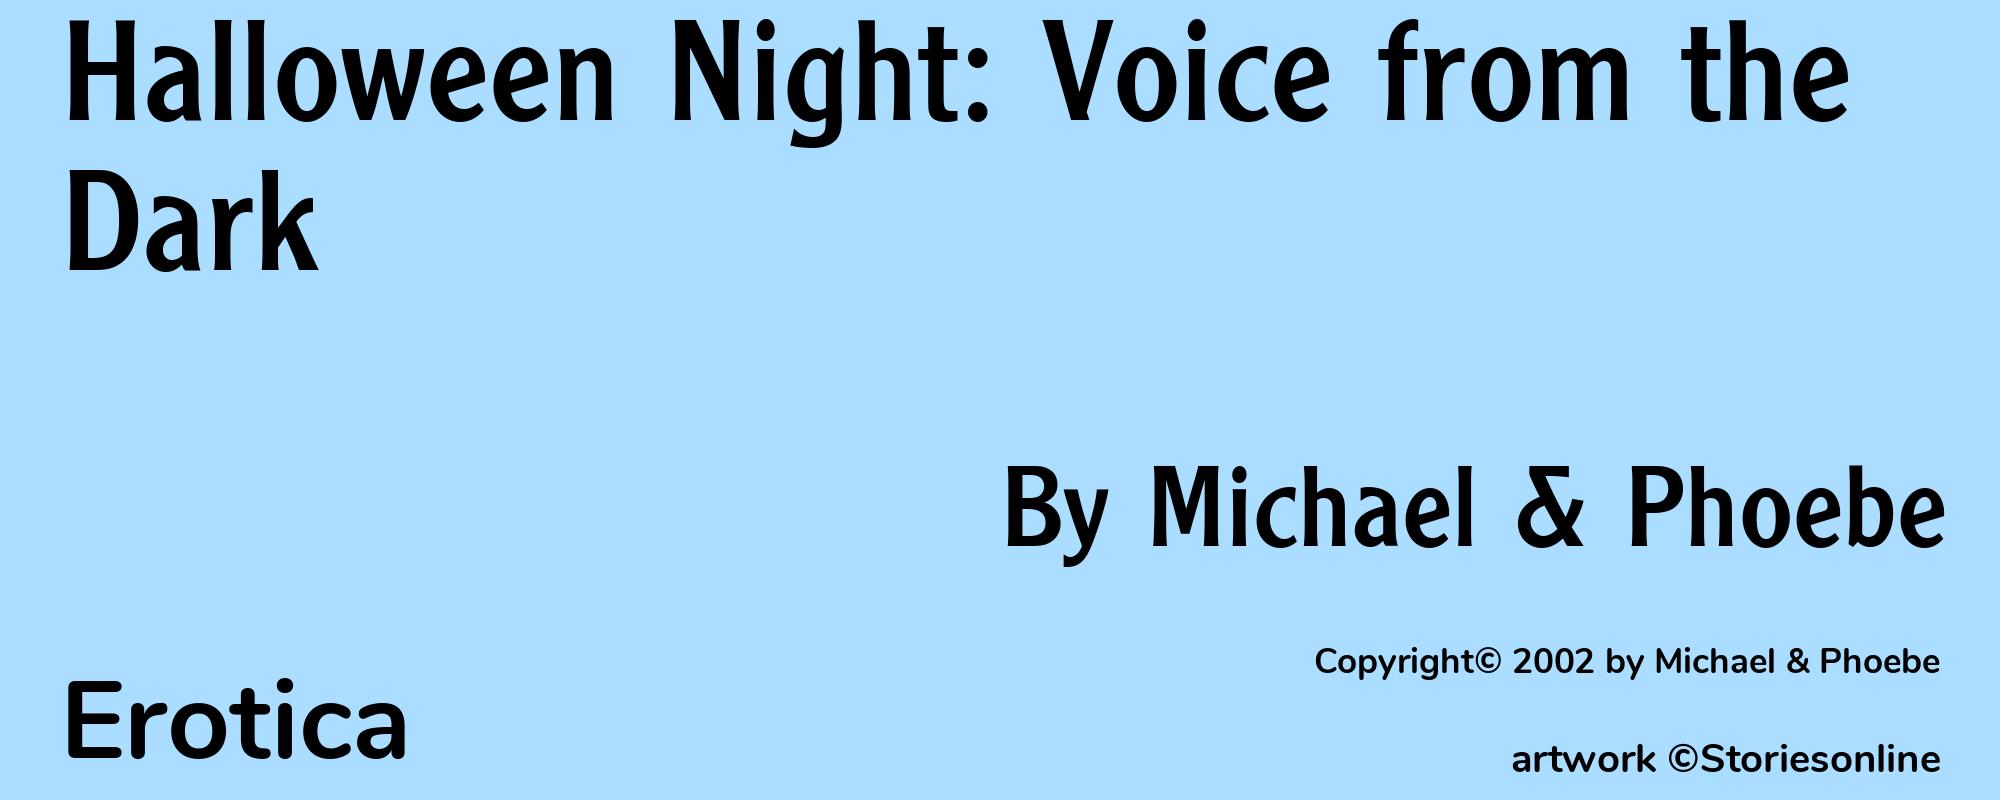 Halloween Night: Voice from the Dark - Cover